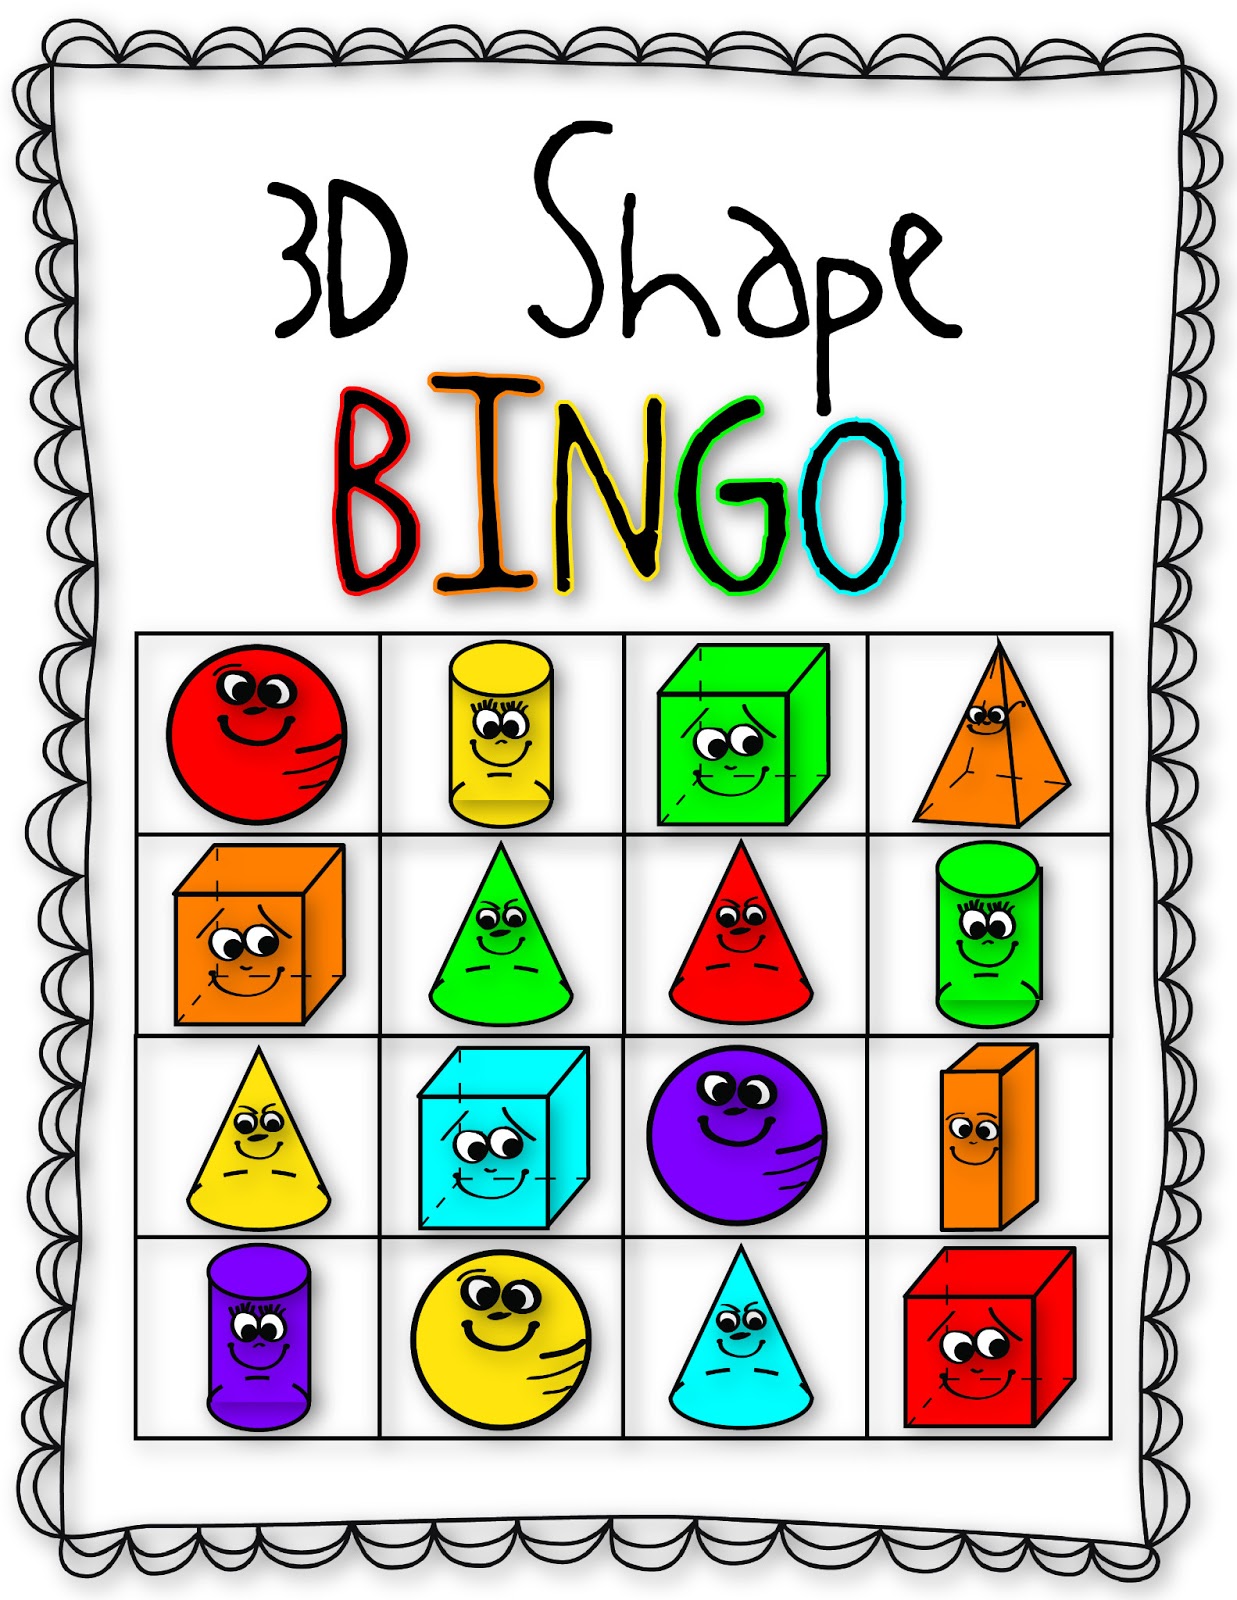 13 Bingo Card Clip Art Free Cliparts That You Can Download To You